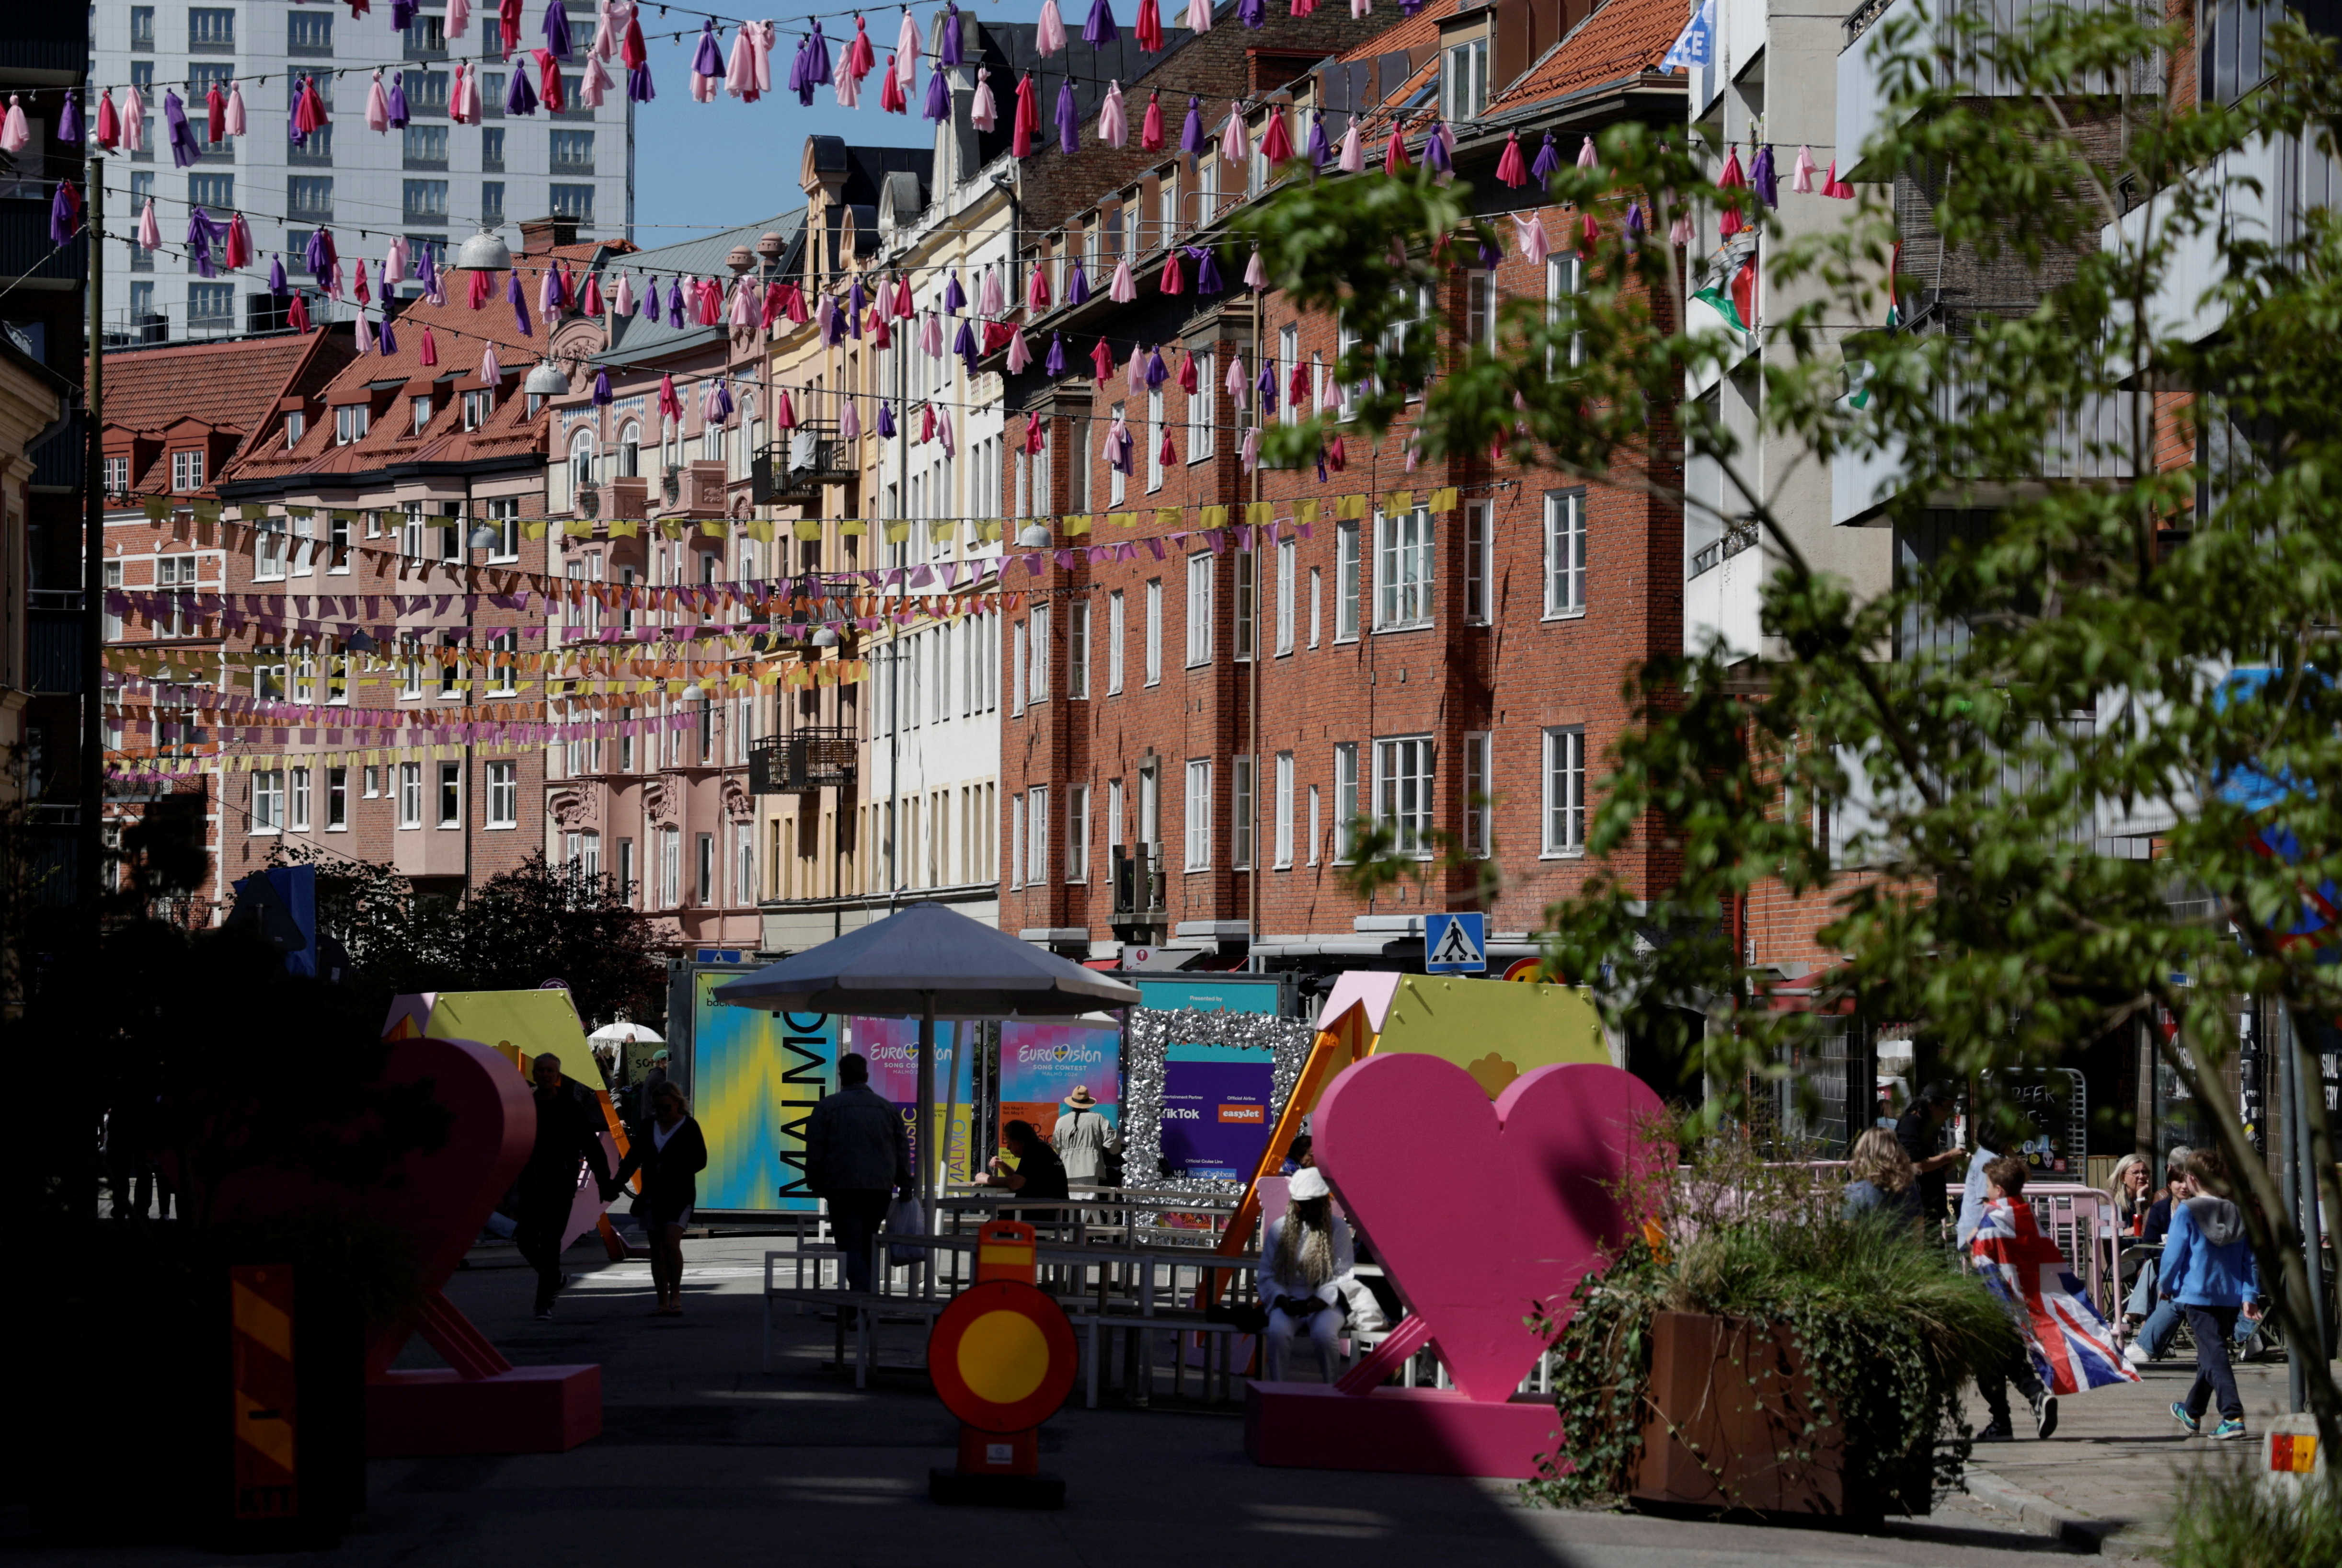 People walk down a street decorated for the Eurovision Song Contest in Malmo